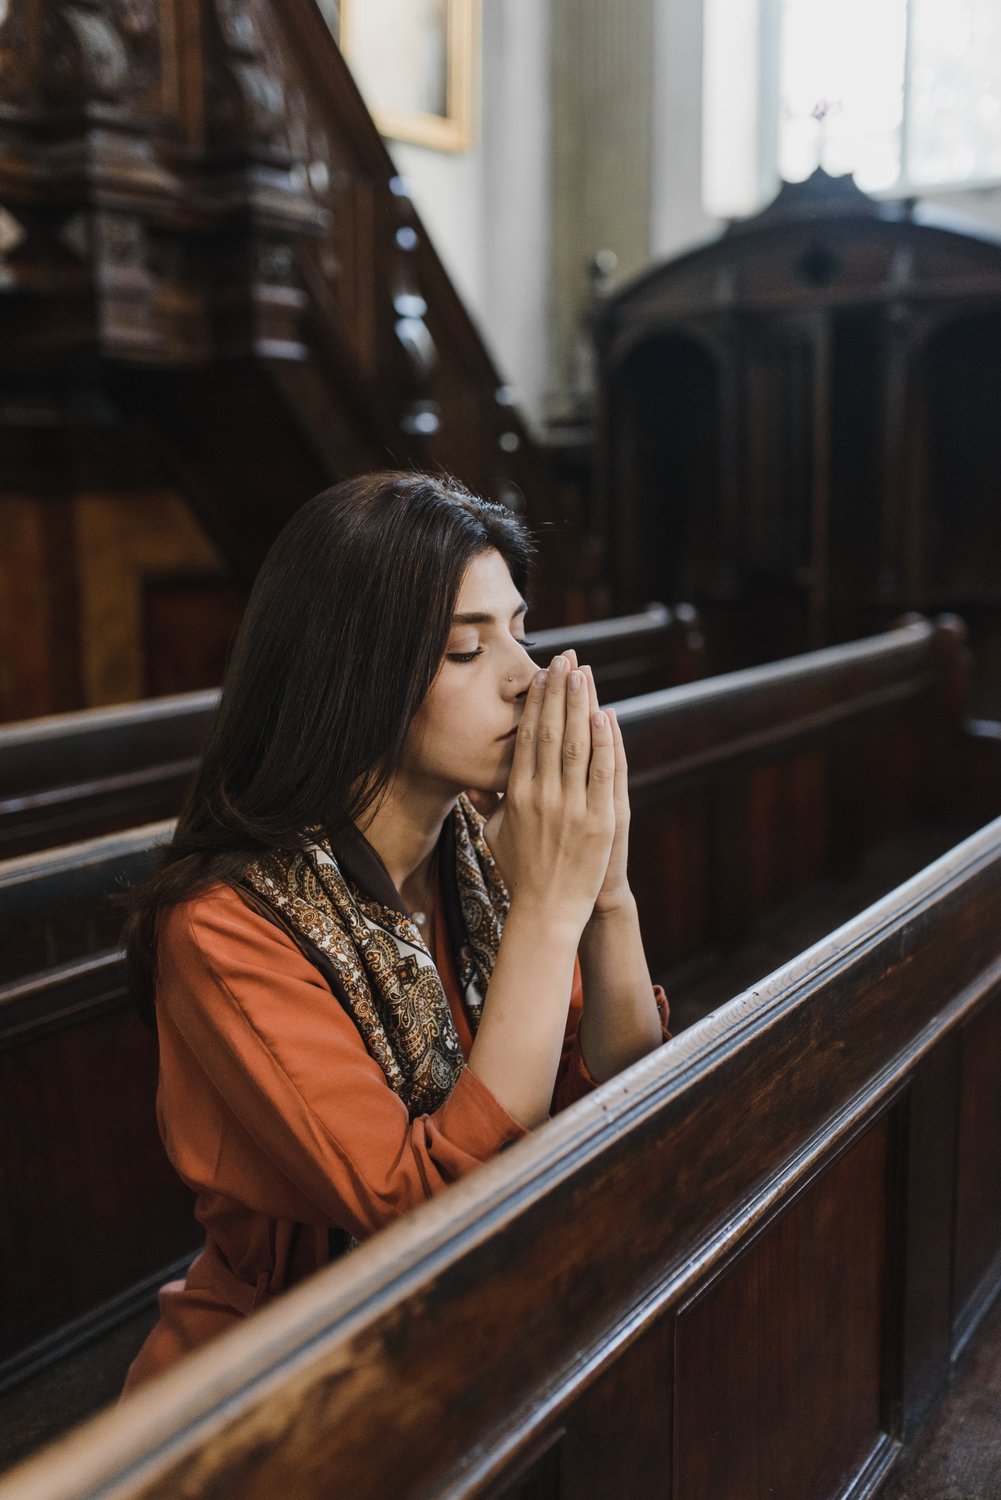 The National Day of Prayer, which returned to Katy on Thursday, is a chance for worshipers to pray and reflect.